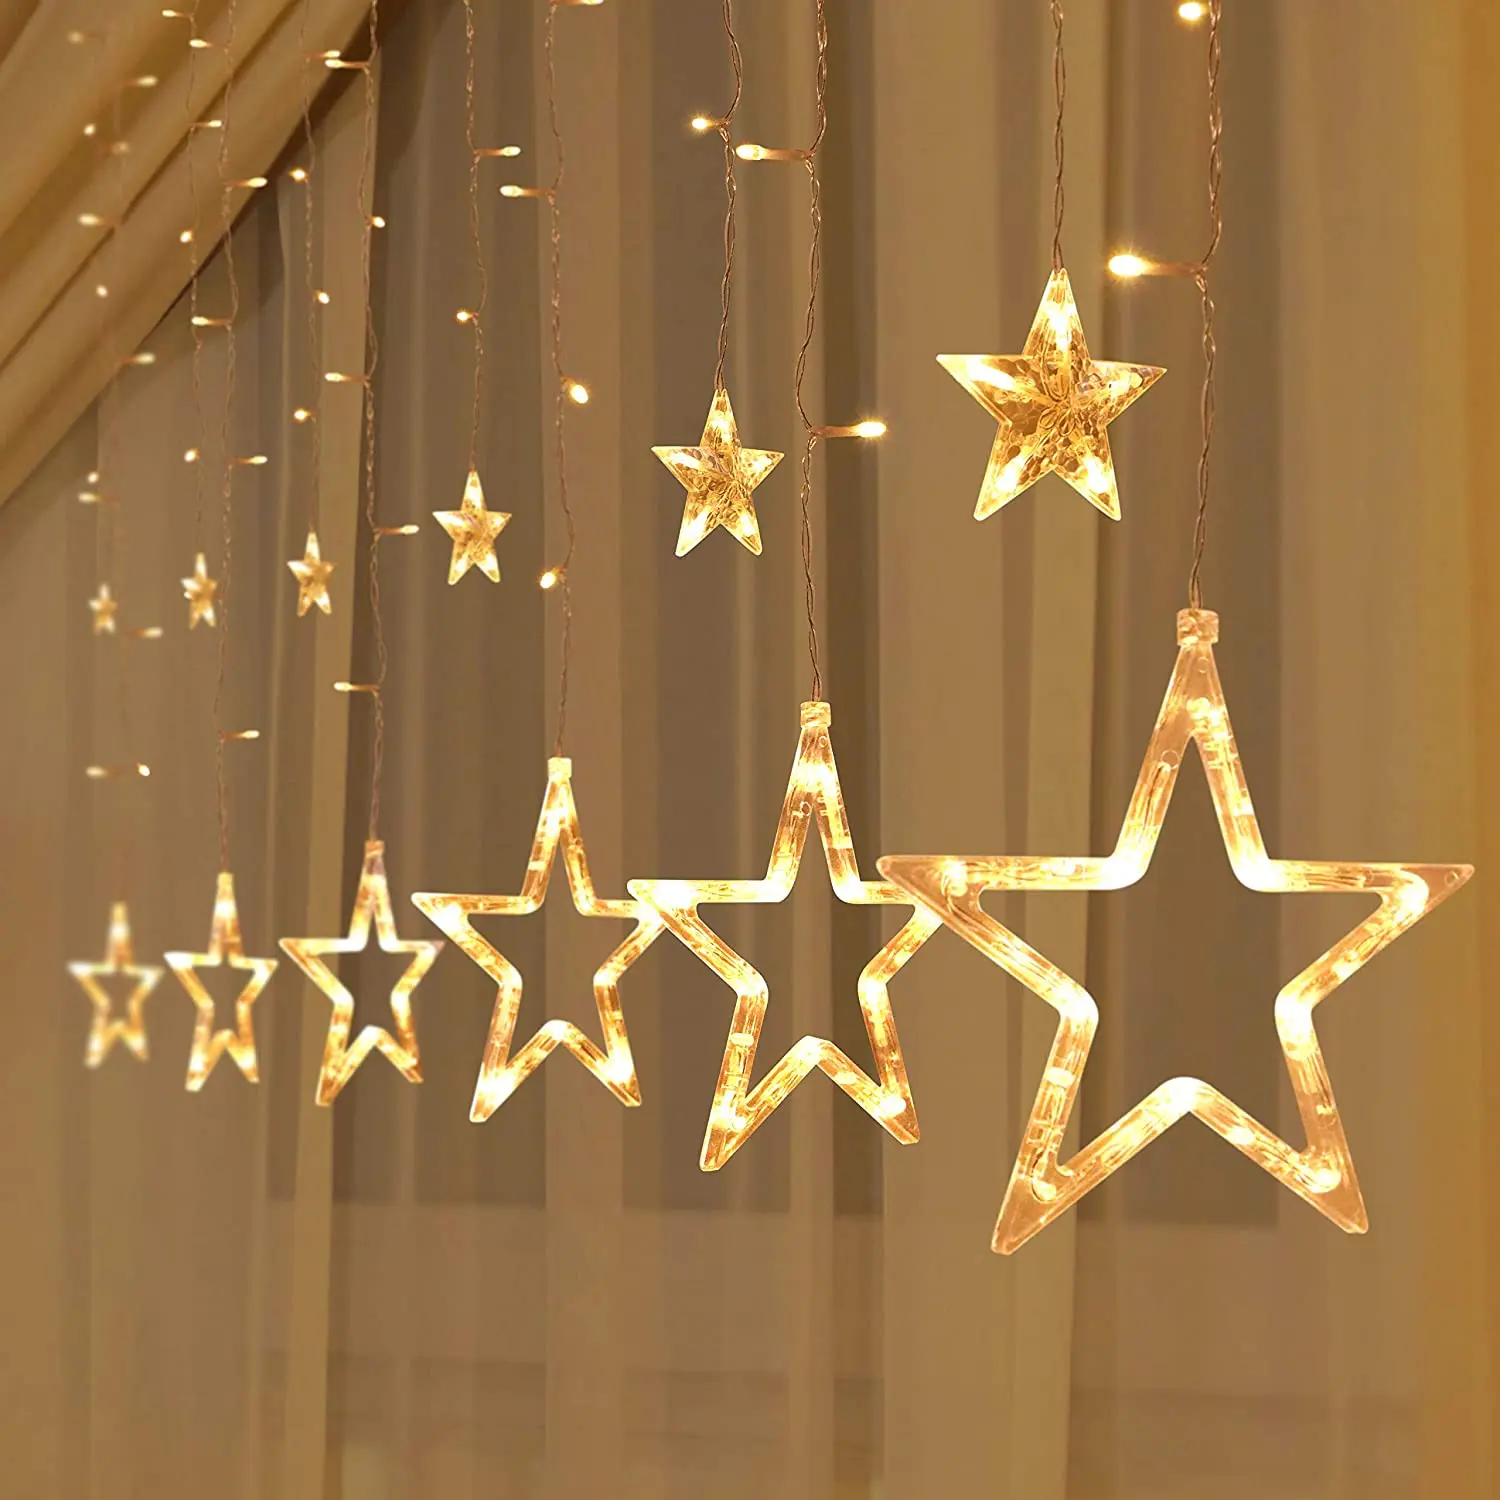 Fairy String Girly Star Curtain Light Garland Bedroom Garden Banquet Room Christmas Holiday Wedding Party Lights Decoration